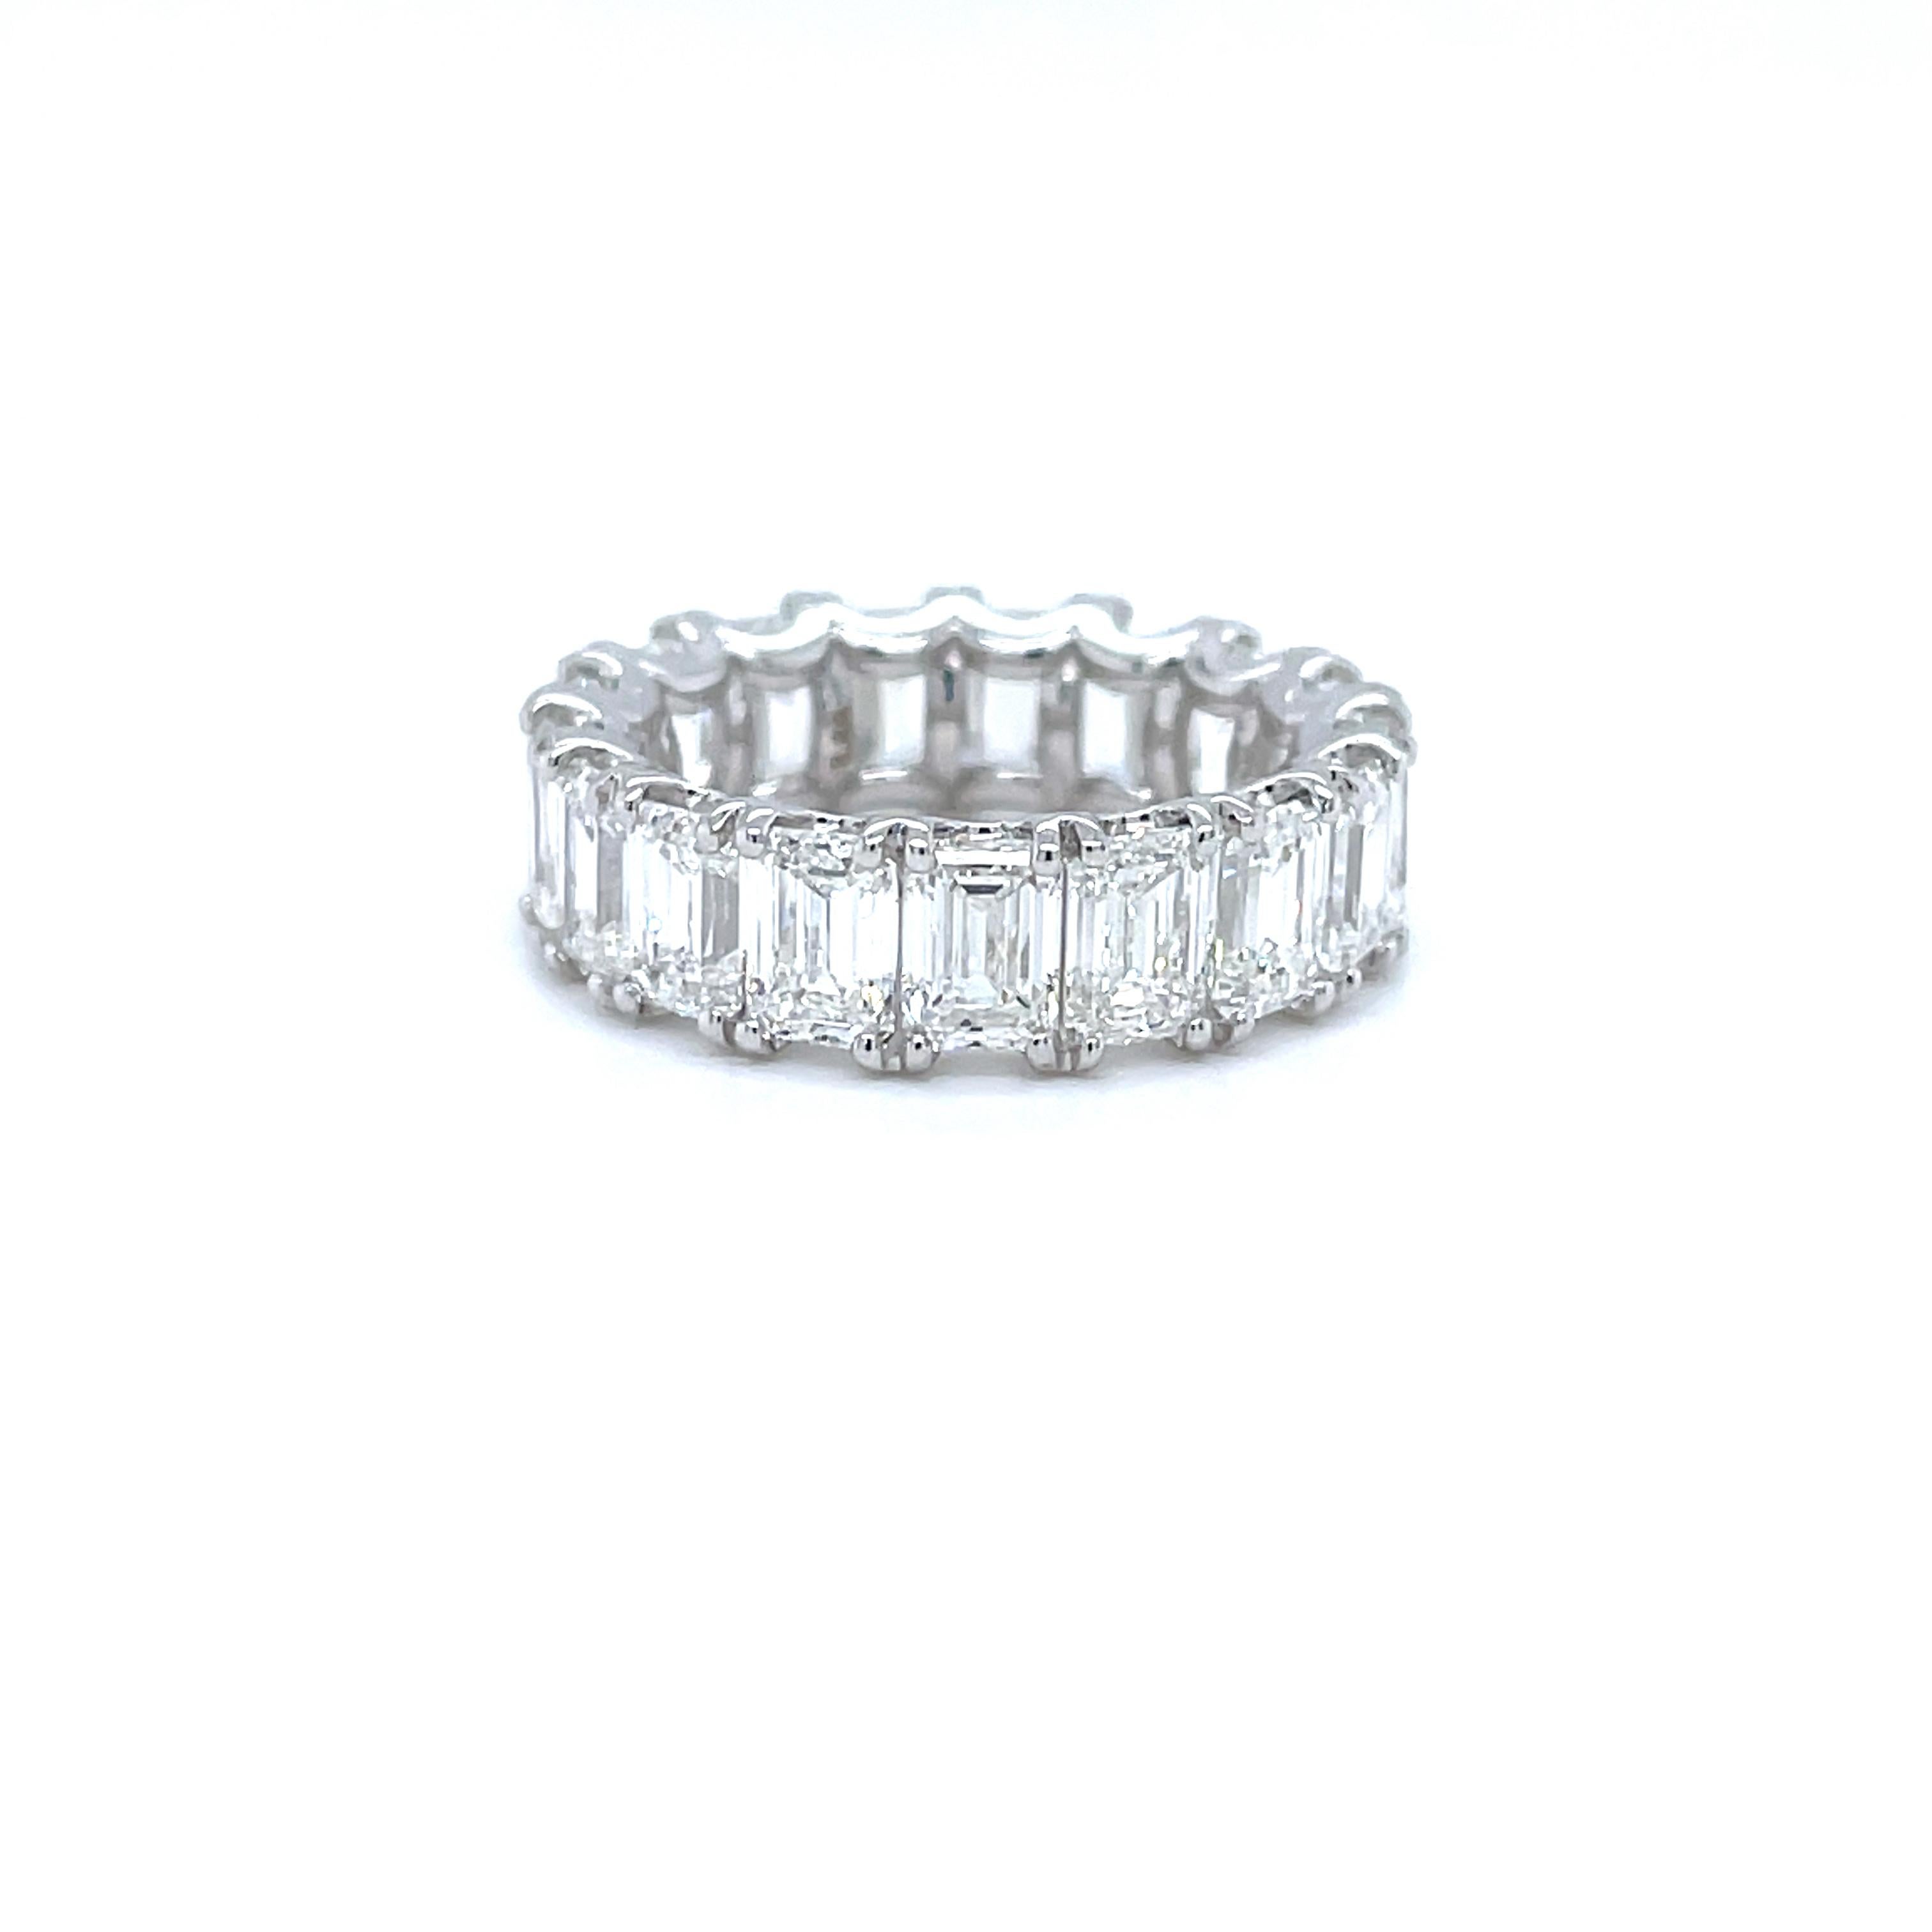 Embrace Timeless Luxury with a GIA Certified 8.88ct Emerald Eternity Diamond Ring

Indulge in unparalleled luxury with this stunning eternity diamond ring. This exquisite piece features a continuous band of 17 breathtaking emerald cut diamonds, each